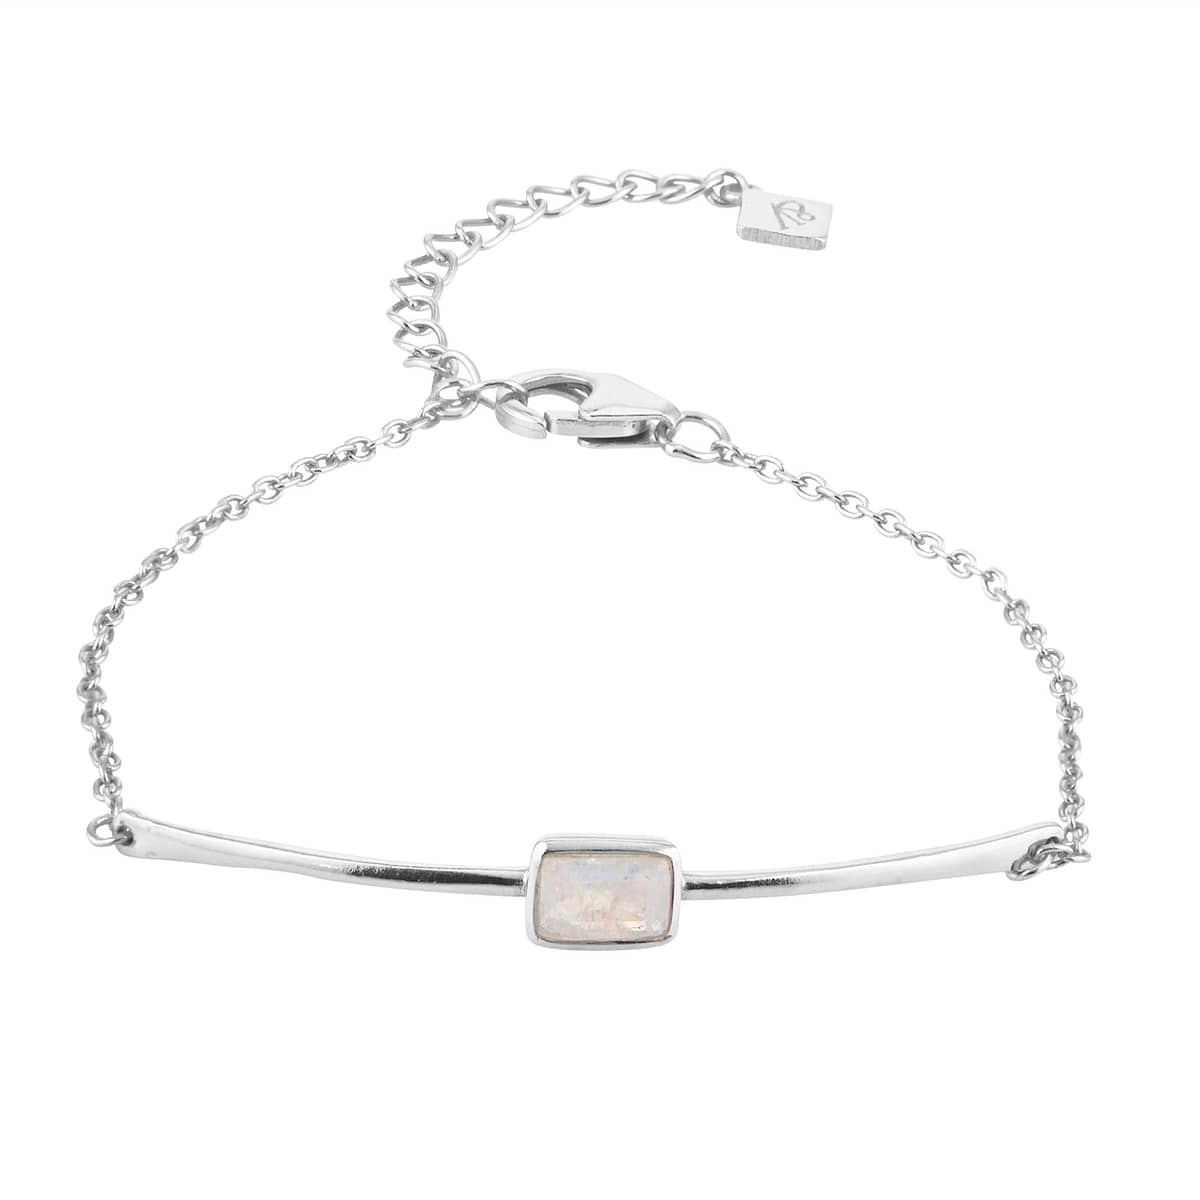 Juvi Sterling Silver Manhattan Bracelet. Set in Sterling Silver, this bracelet features a small pendant with a sparkling moonstone. The bracelet transitions from a bar to a chain, with several sizing options. Add a bold statement to your jewellery collection with this beautiful and unique stone.